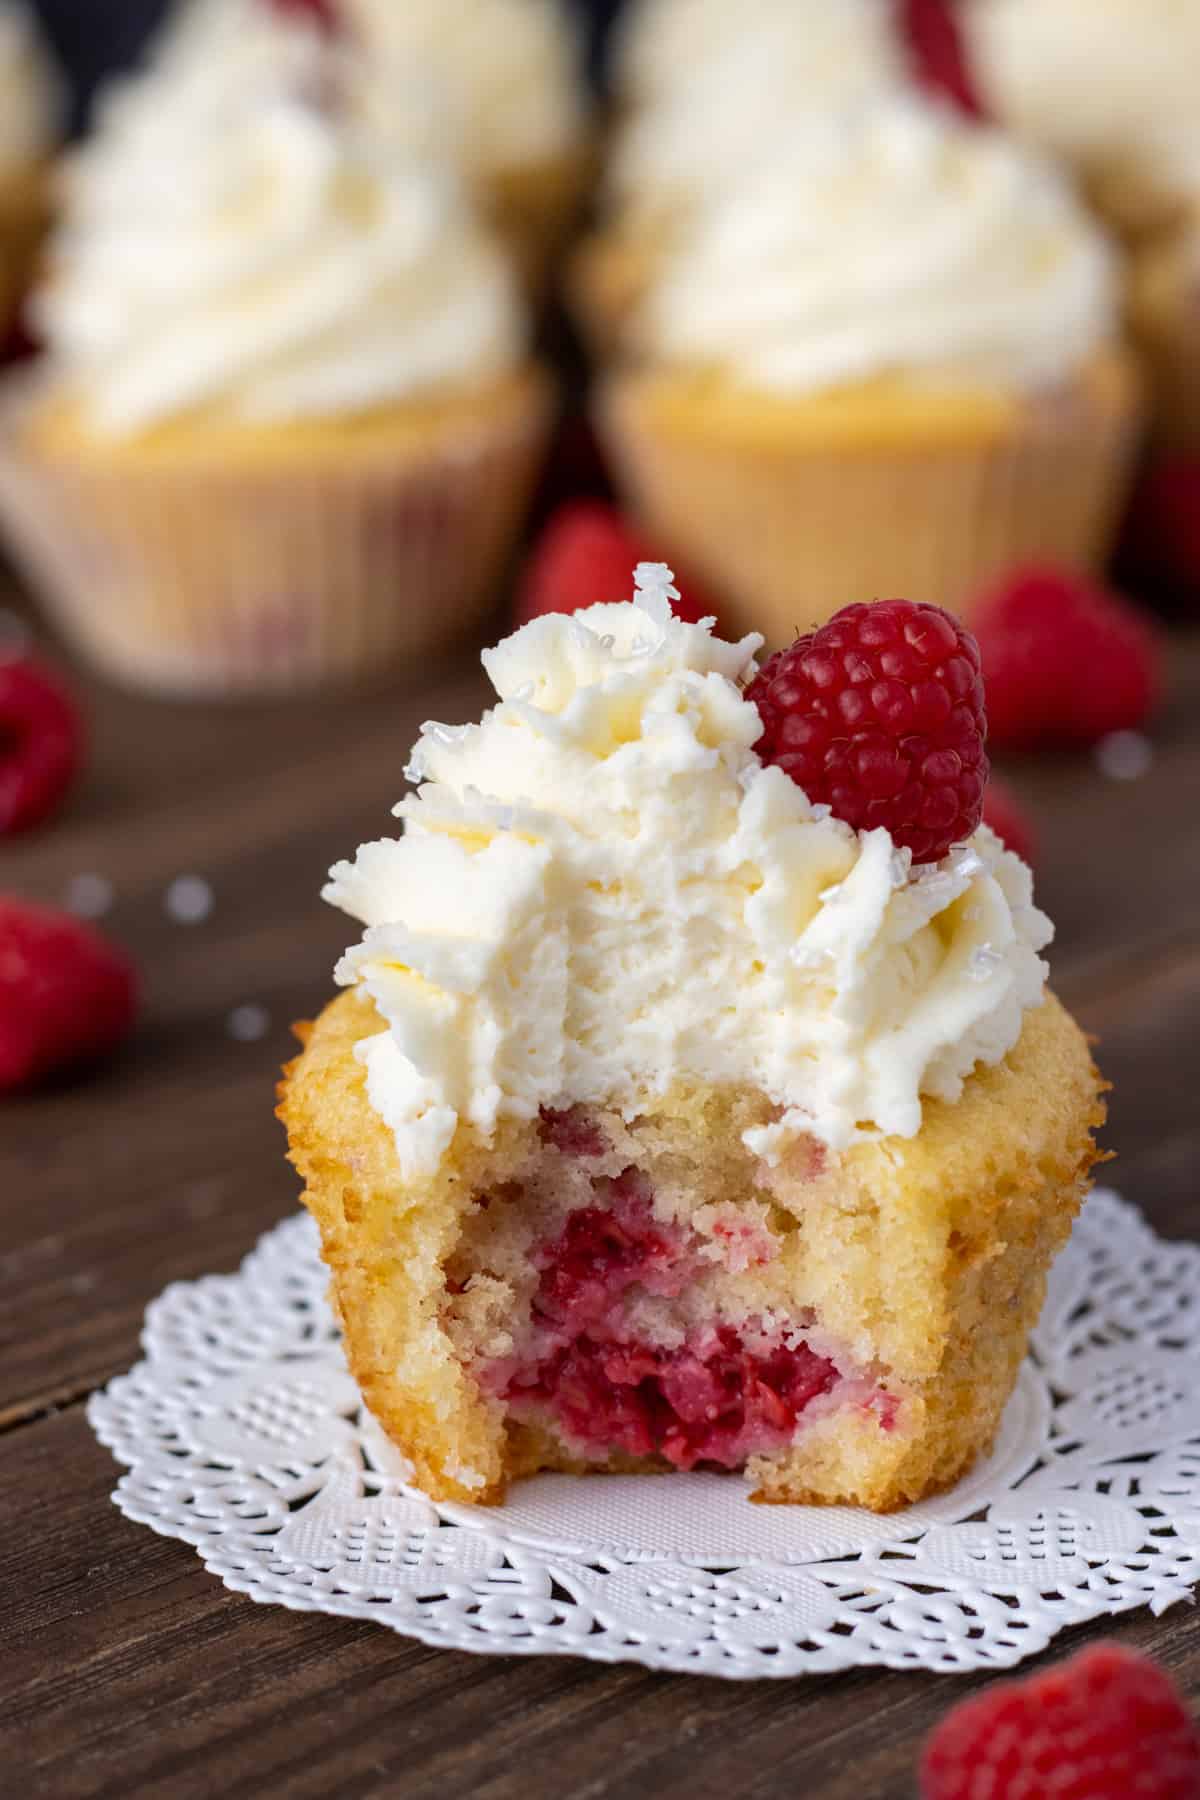 Raspberry cupcake with a bite out of it.